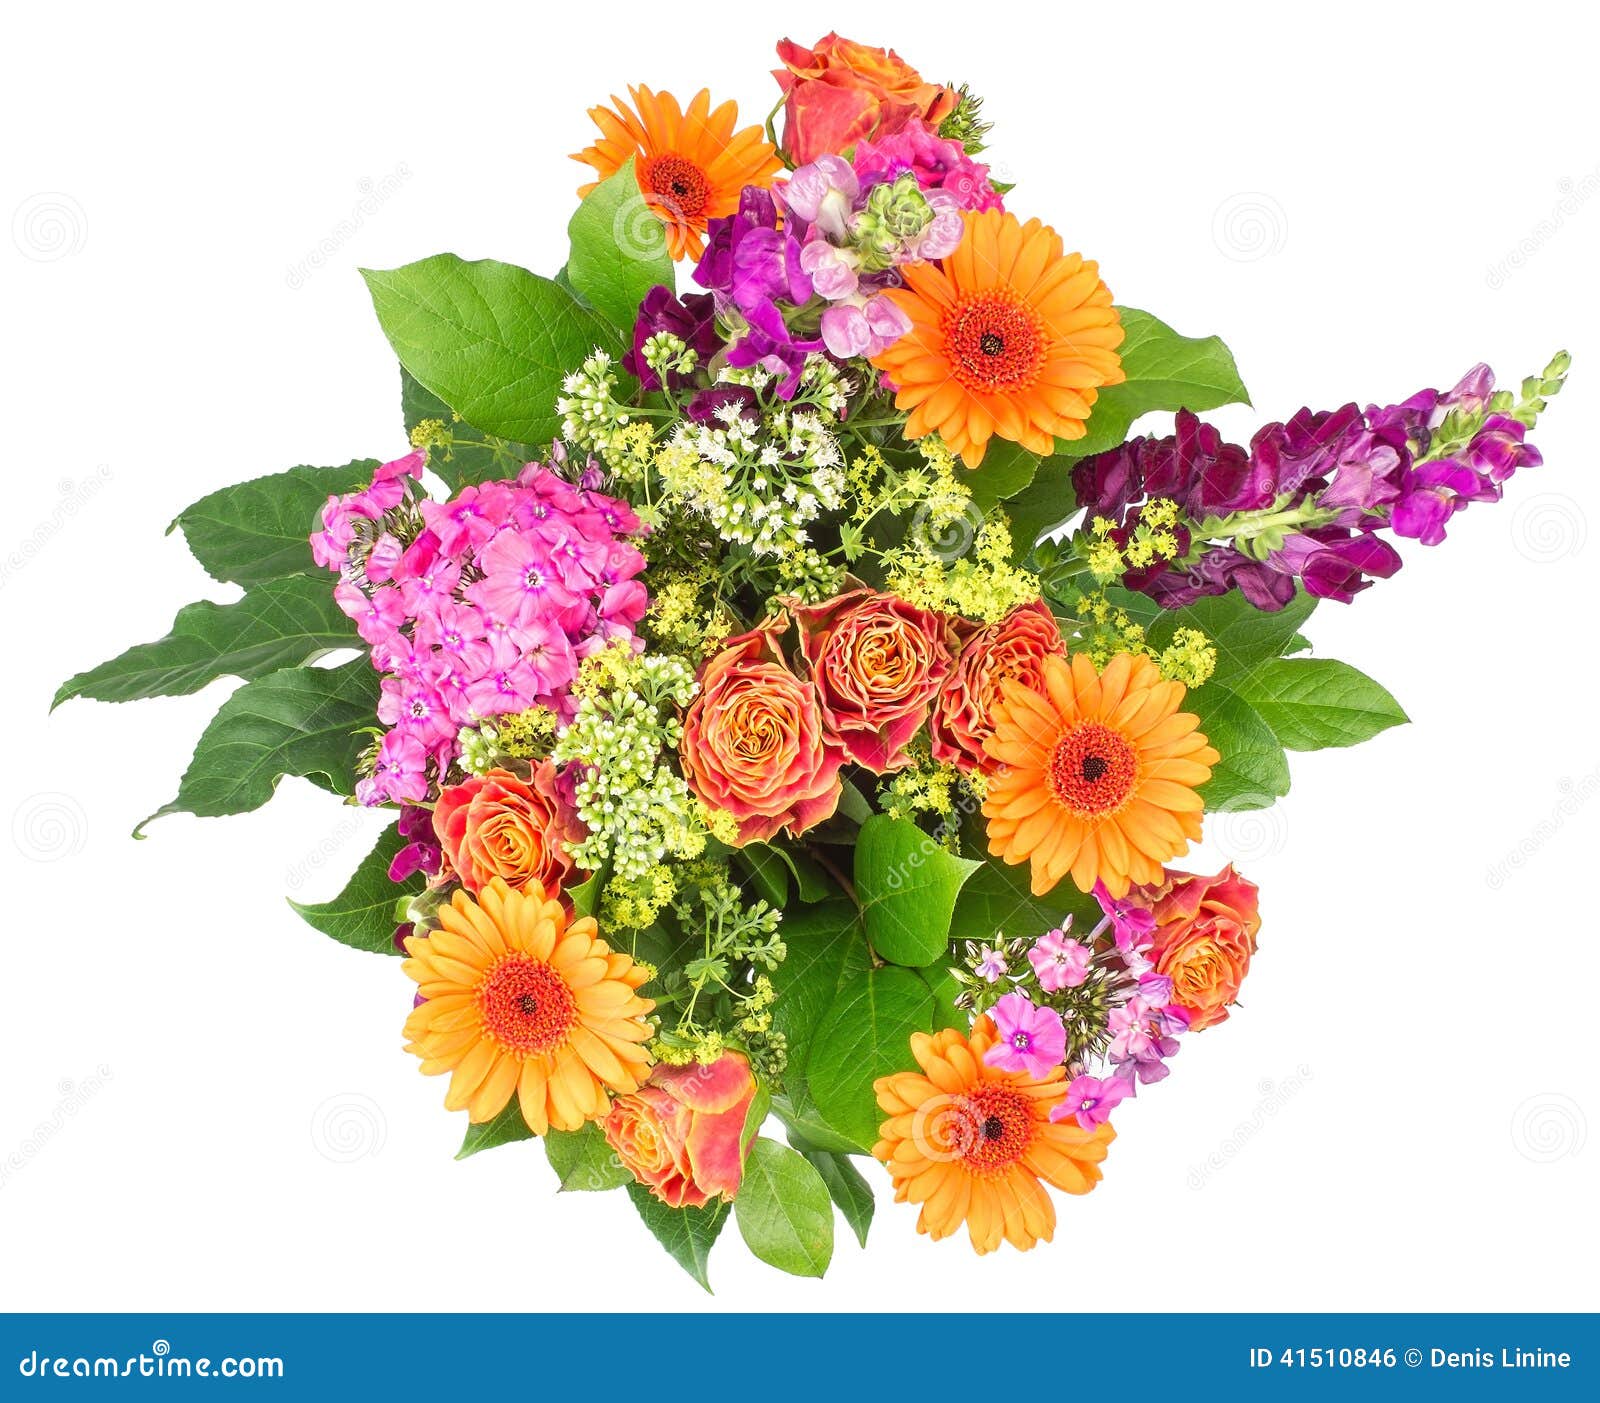 Bouquet of Flowers Isolated on White Stock Photo - Image of background